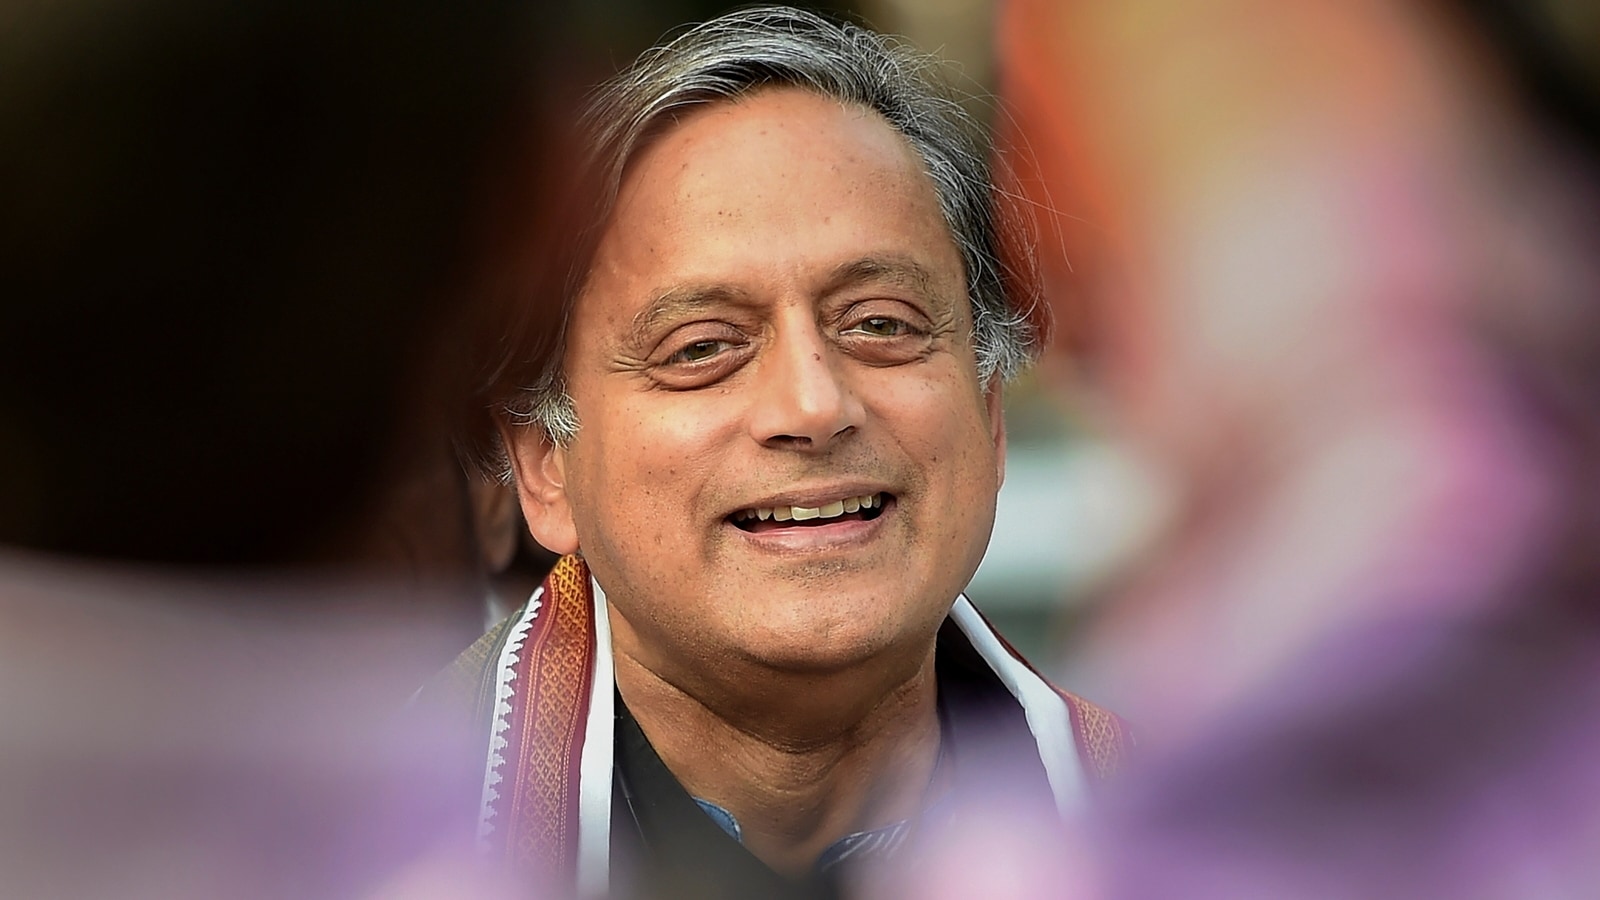 bangladesh-teacher-finds-shashi-tharoor-s-hairline-is-a-good-quartic-fit-mp-responds